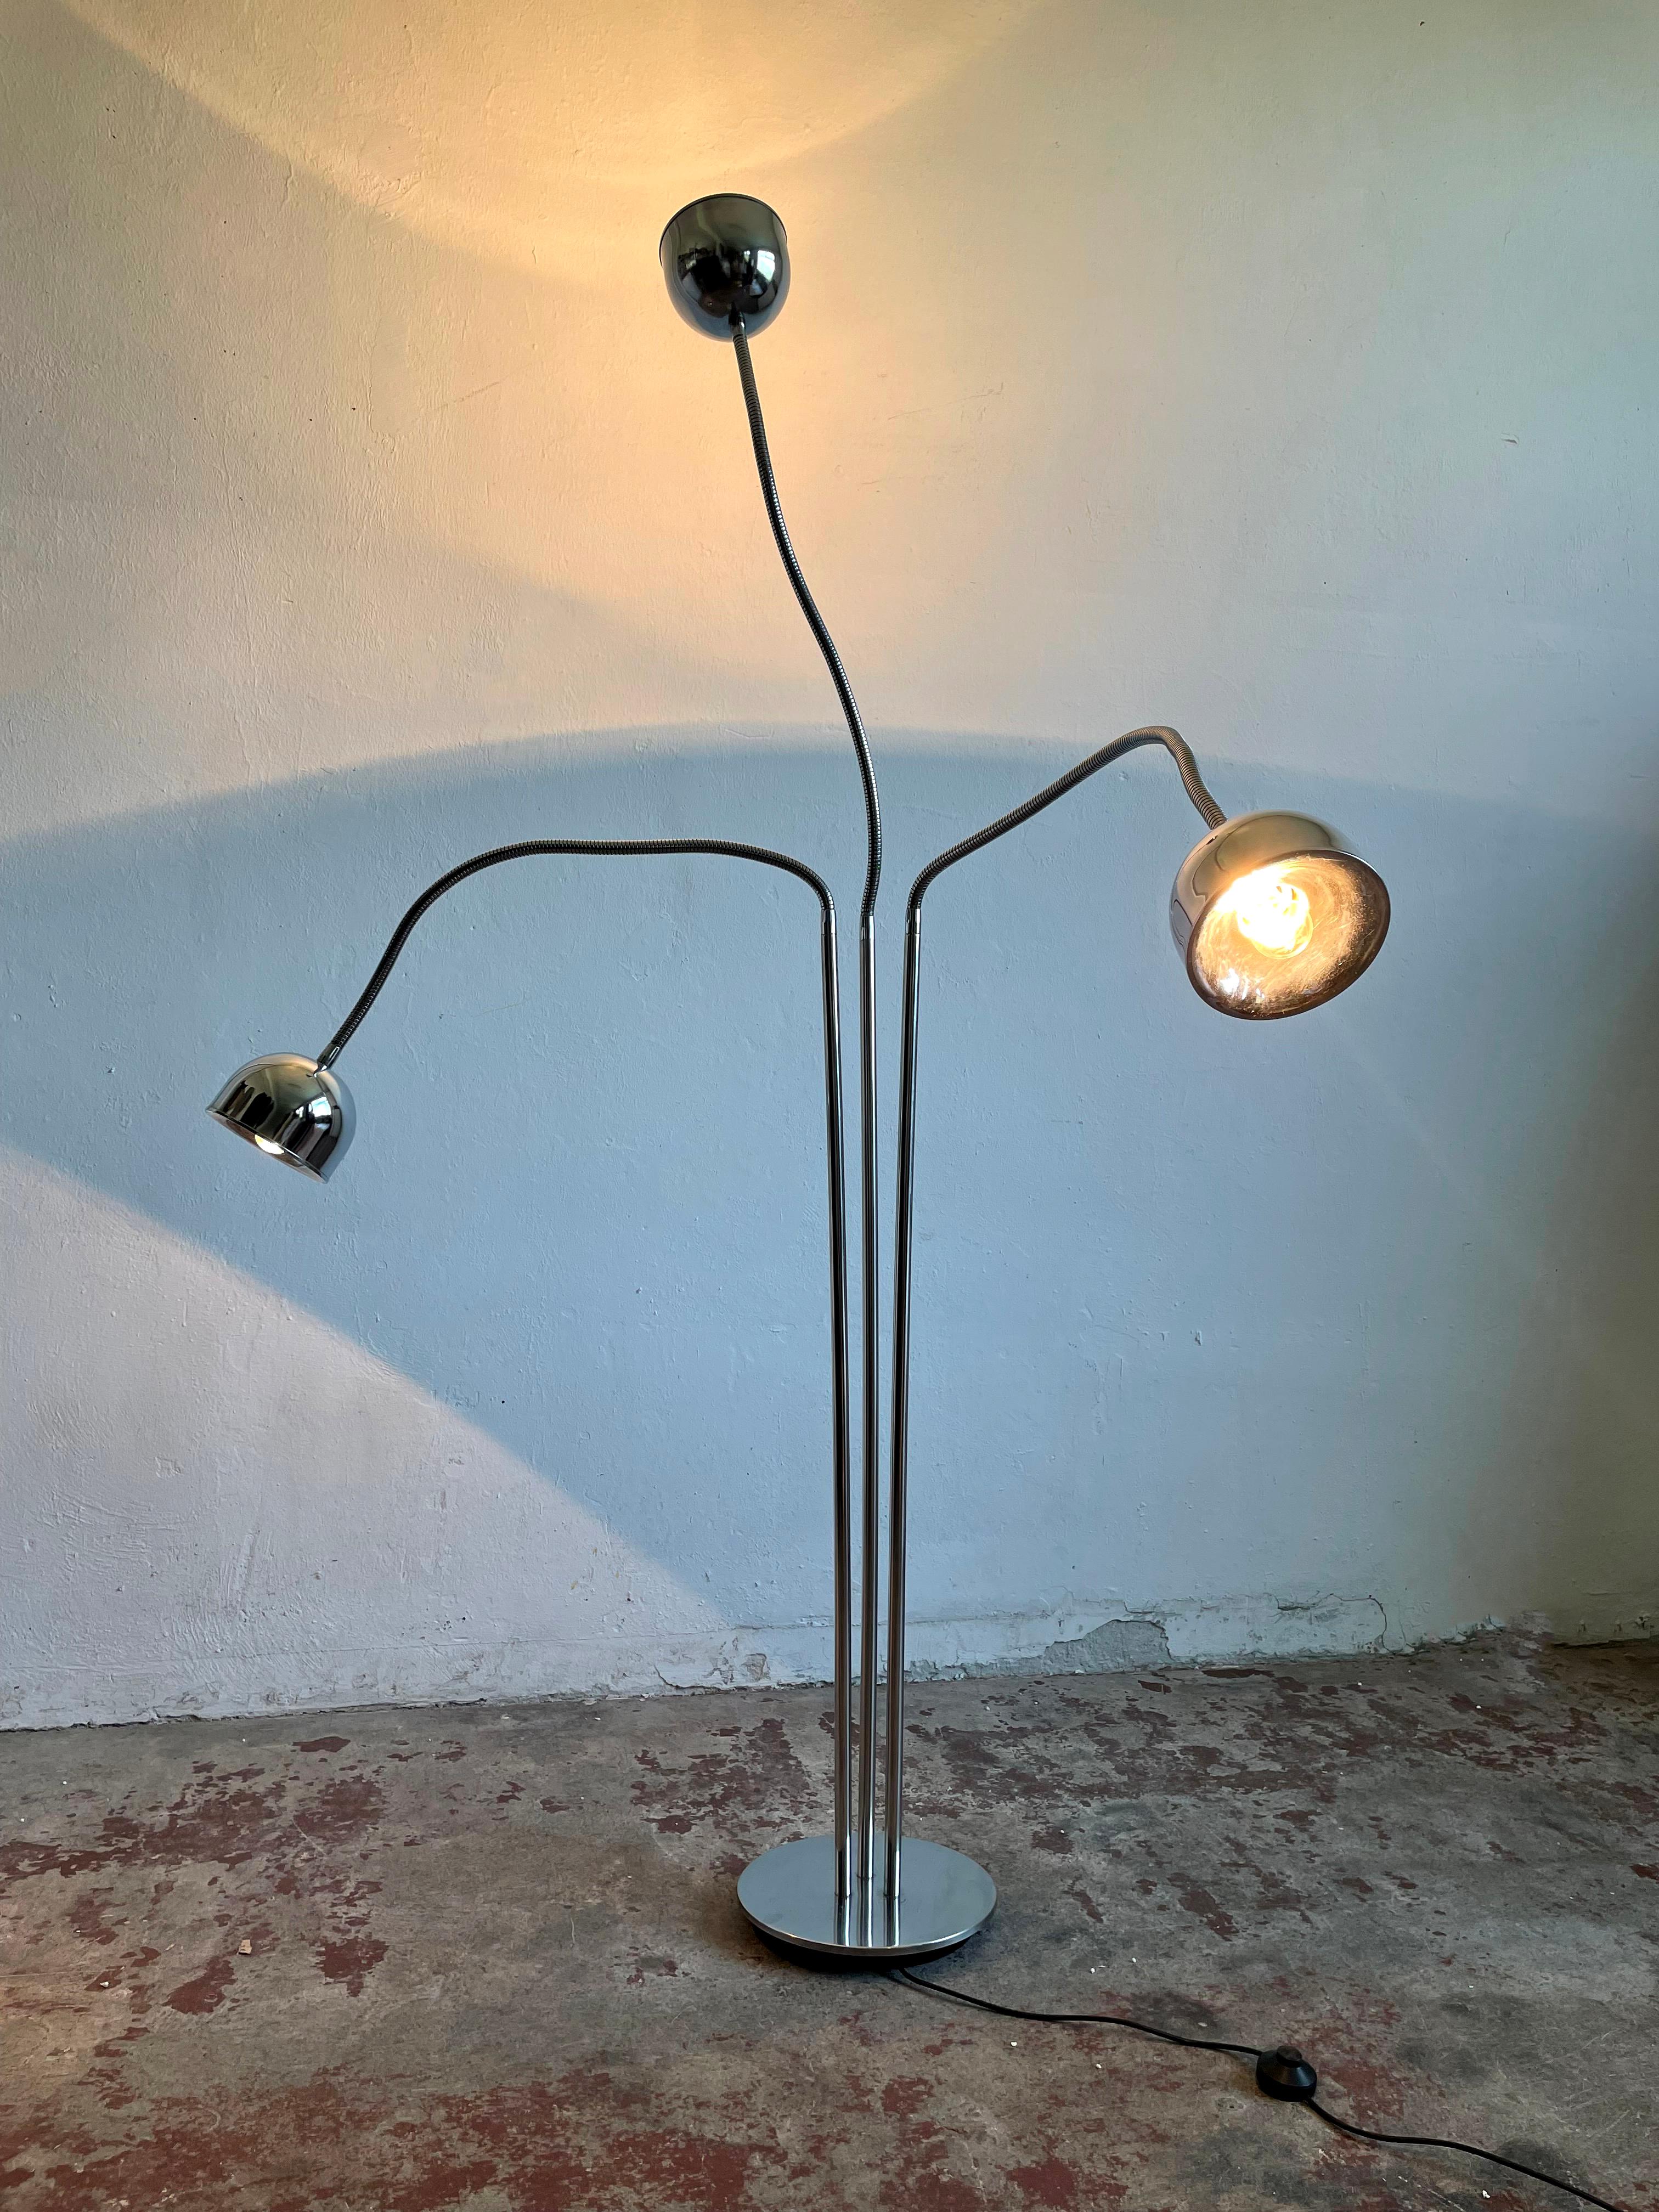 Vintage Italian Chrome Floor Lamp in style of Reggiani, Space Age Lamp, 1970s For Sale 7